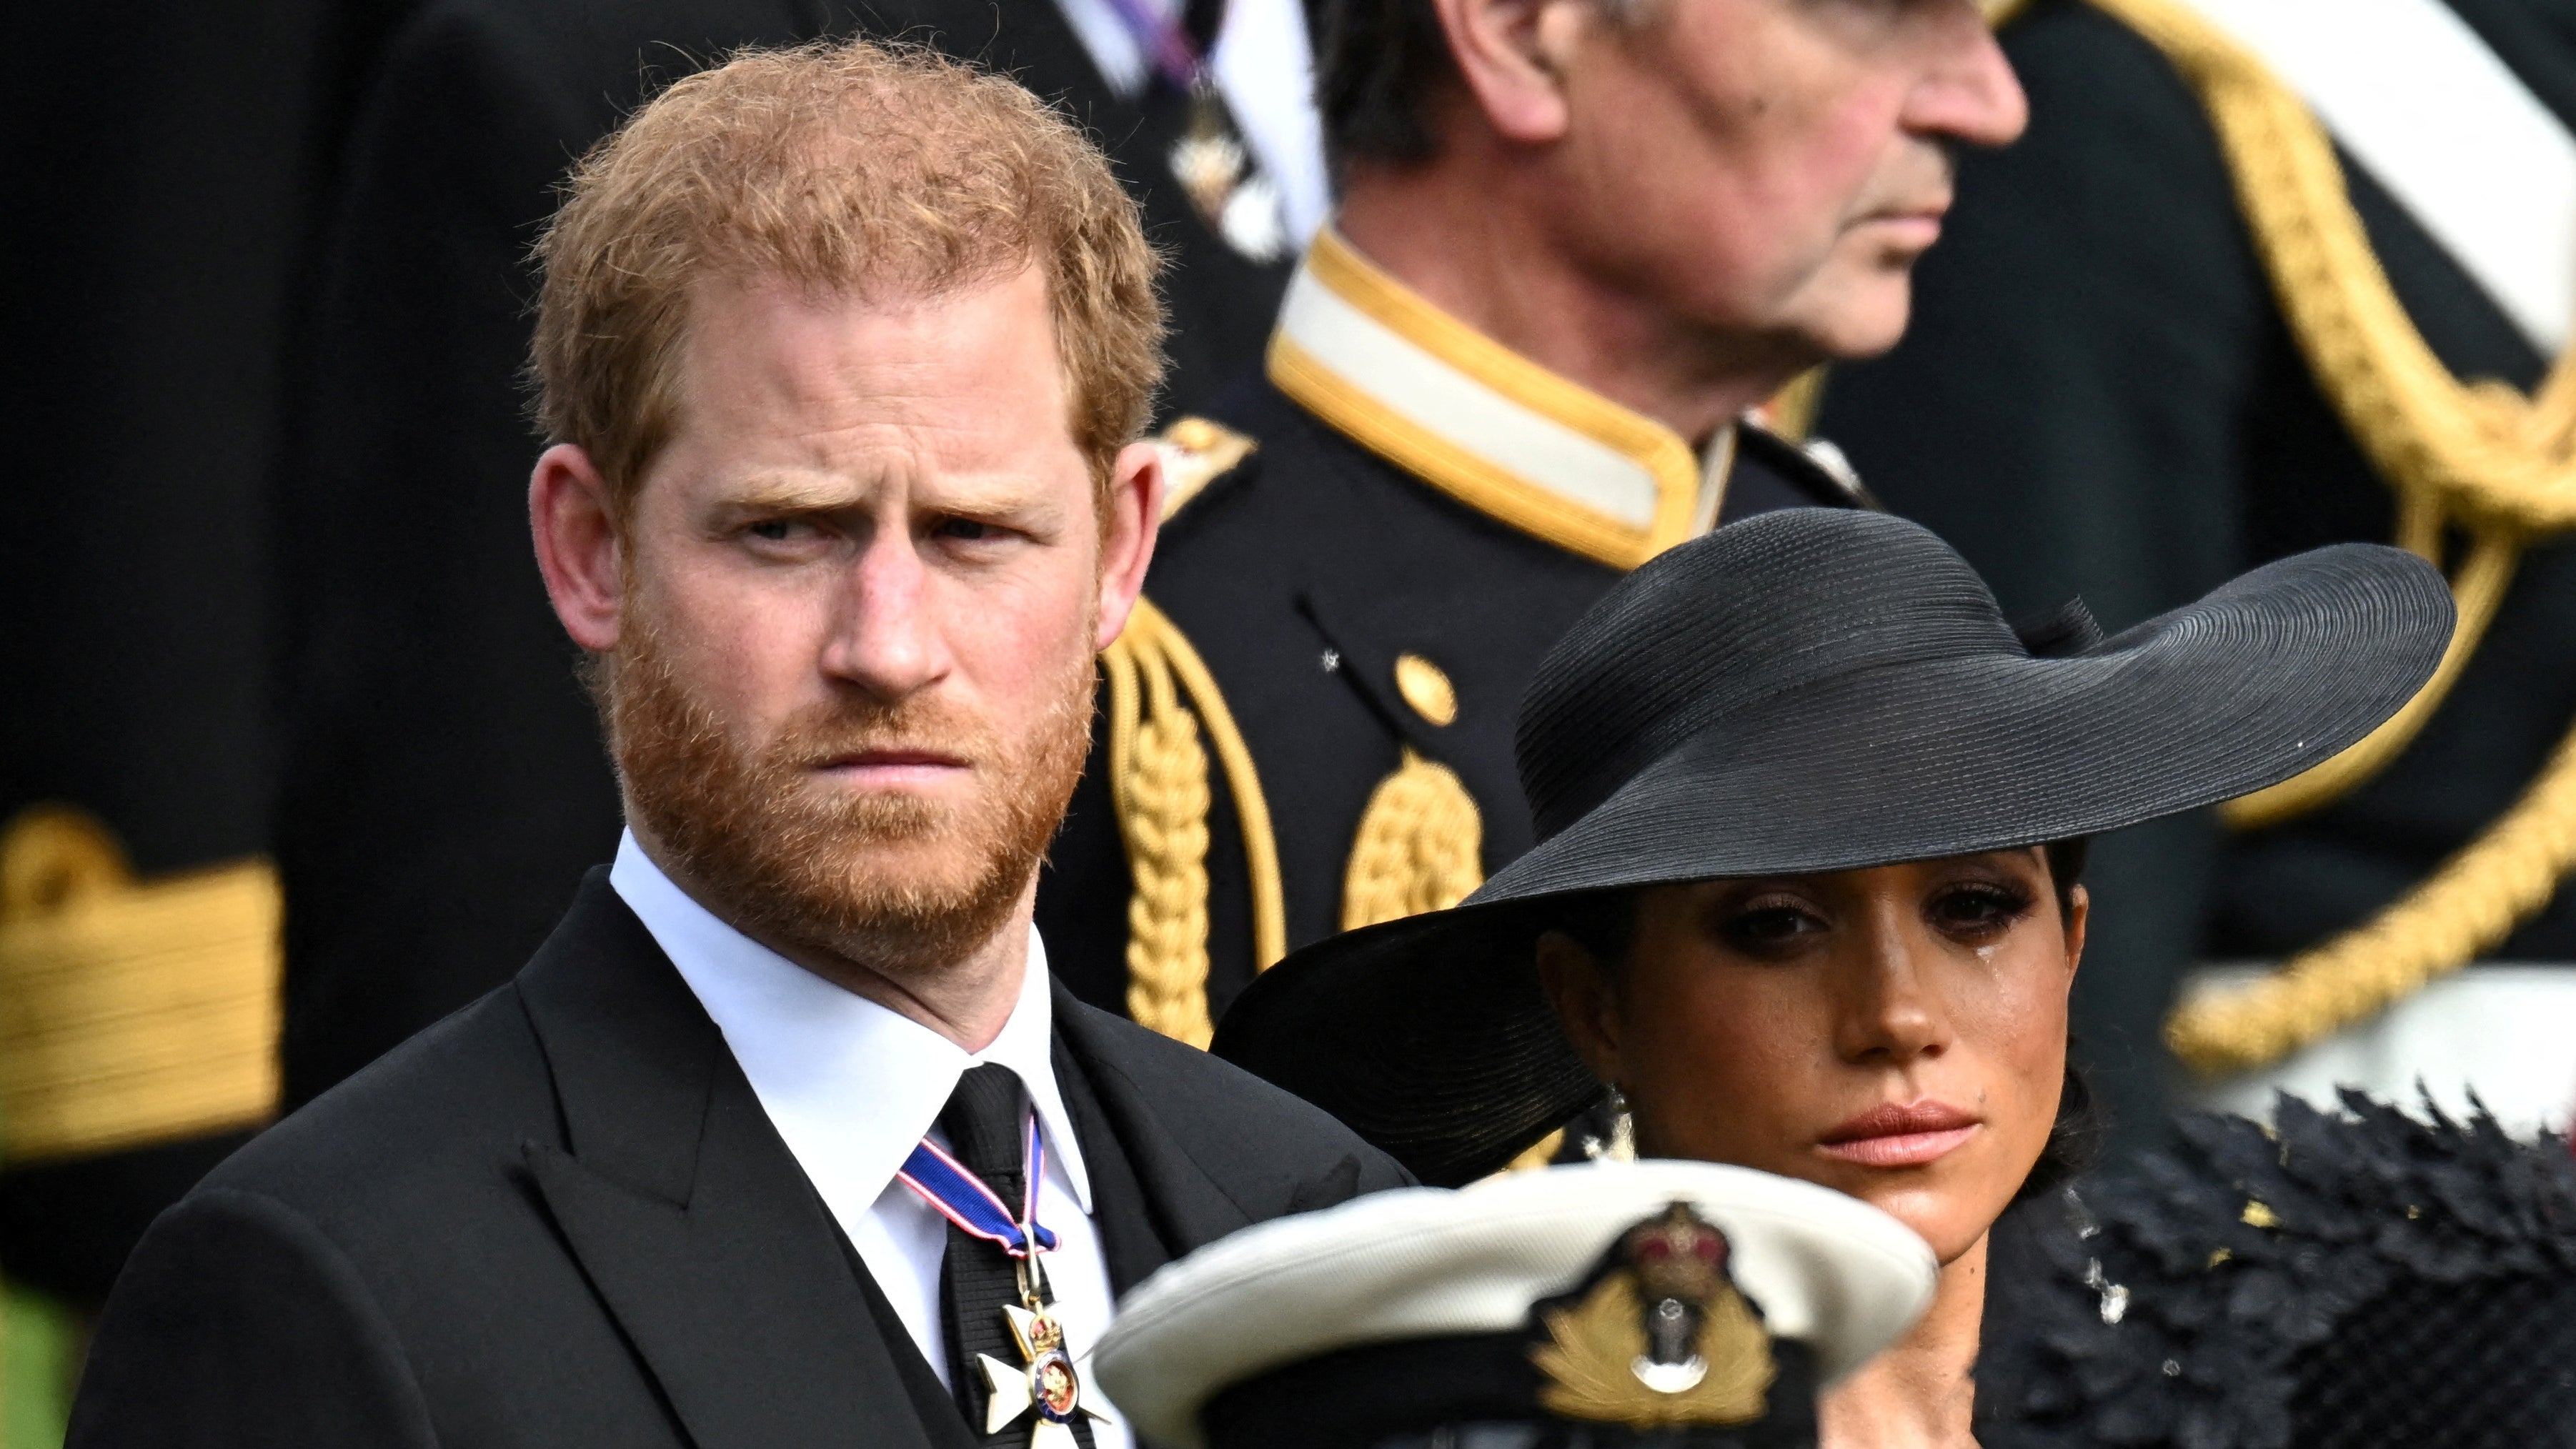 Prince Harry and Meghan Markle have both successfully sued Associated Newspapers in the past